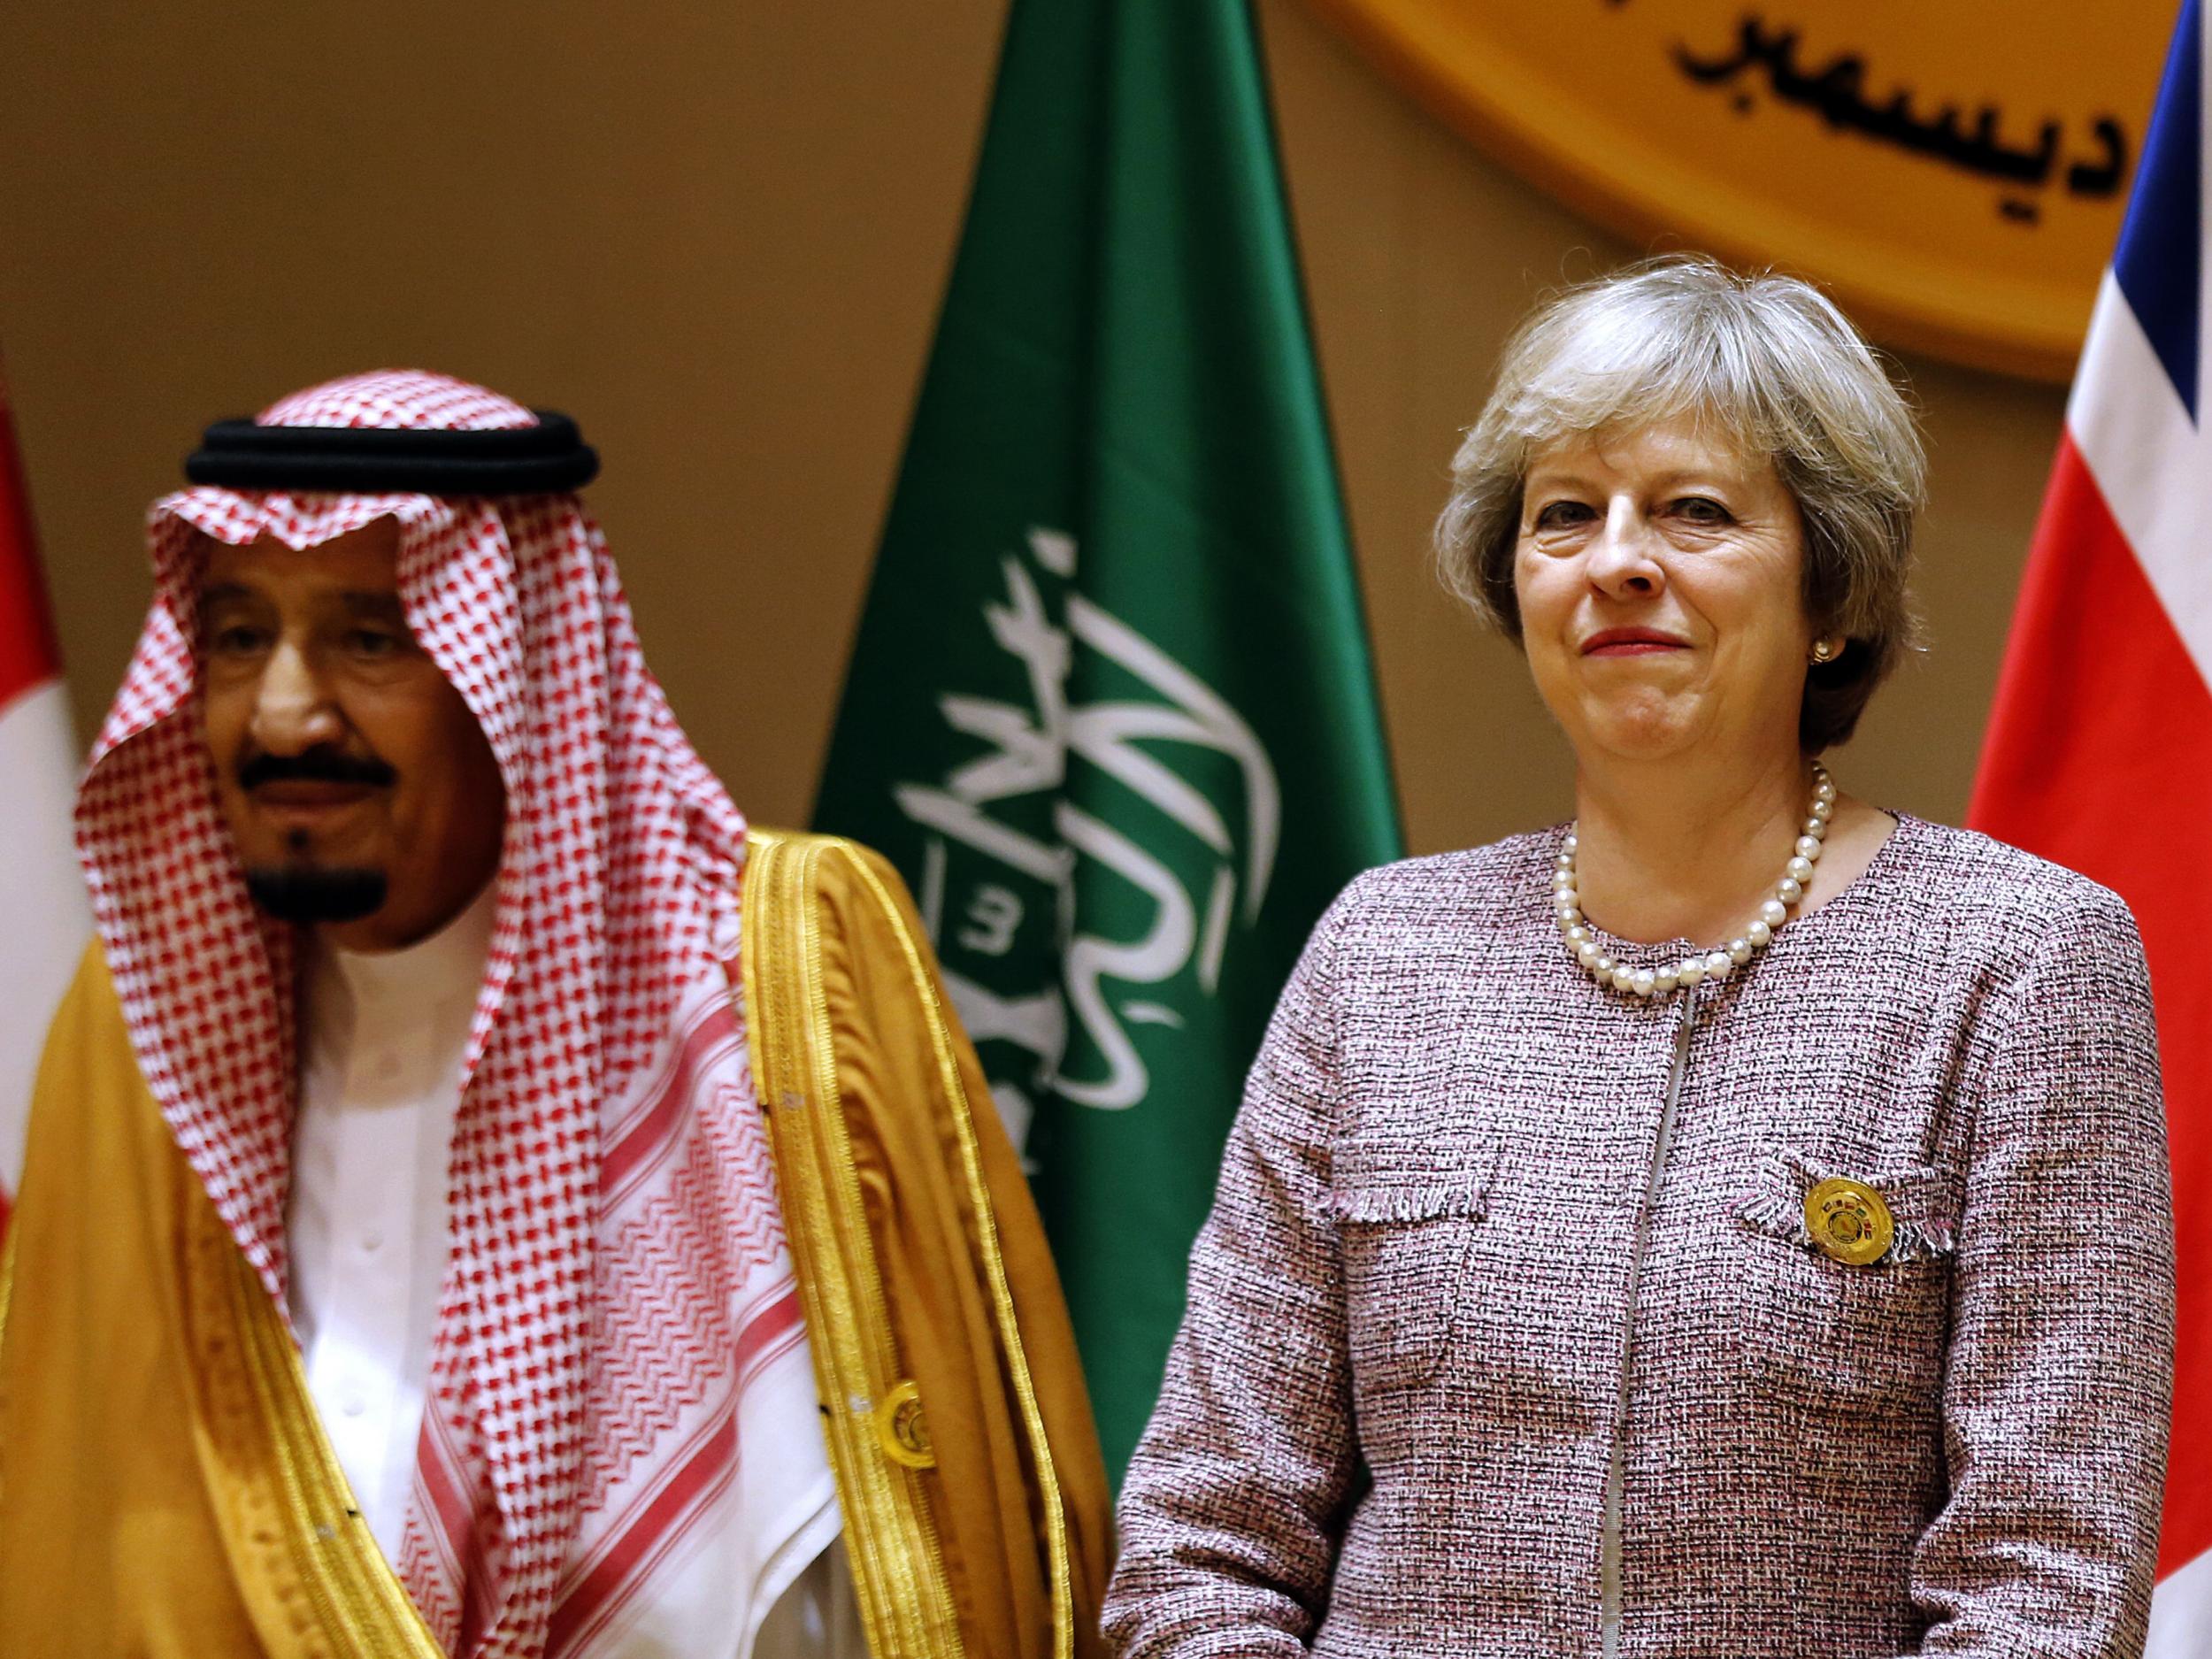 Theresa May has already suppressed a report so it wouldn’t upset the Saudis. And we wonder why we go to war with the Middle East